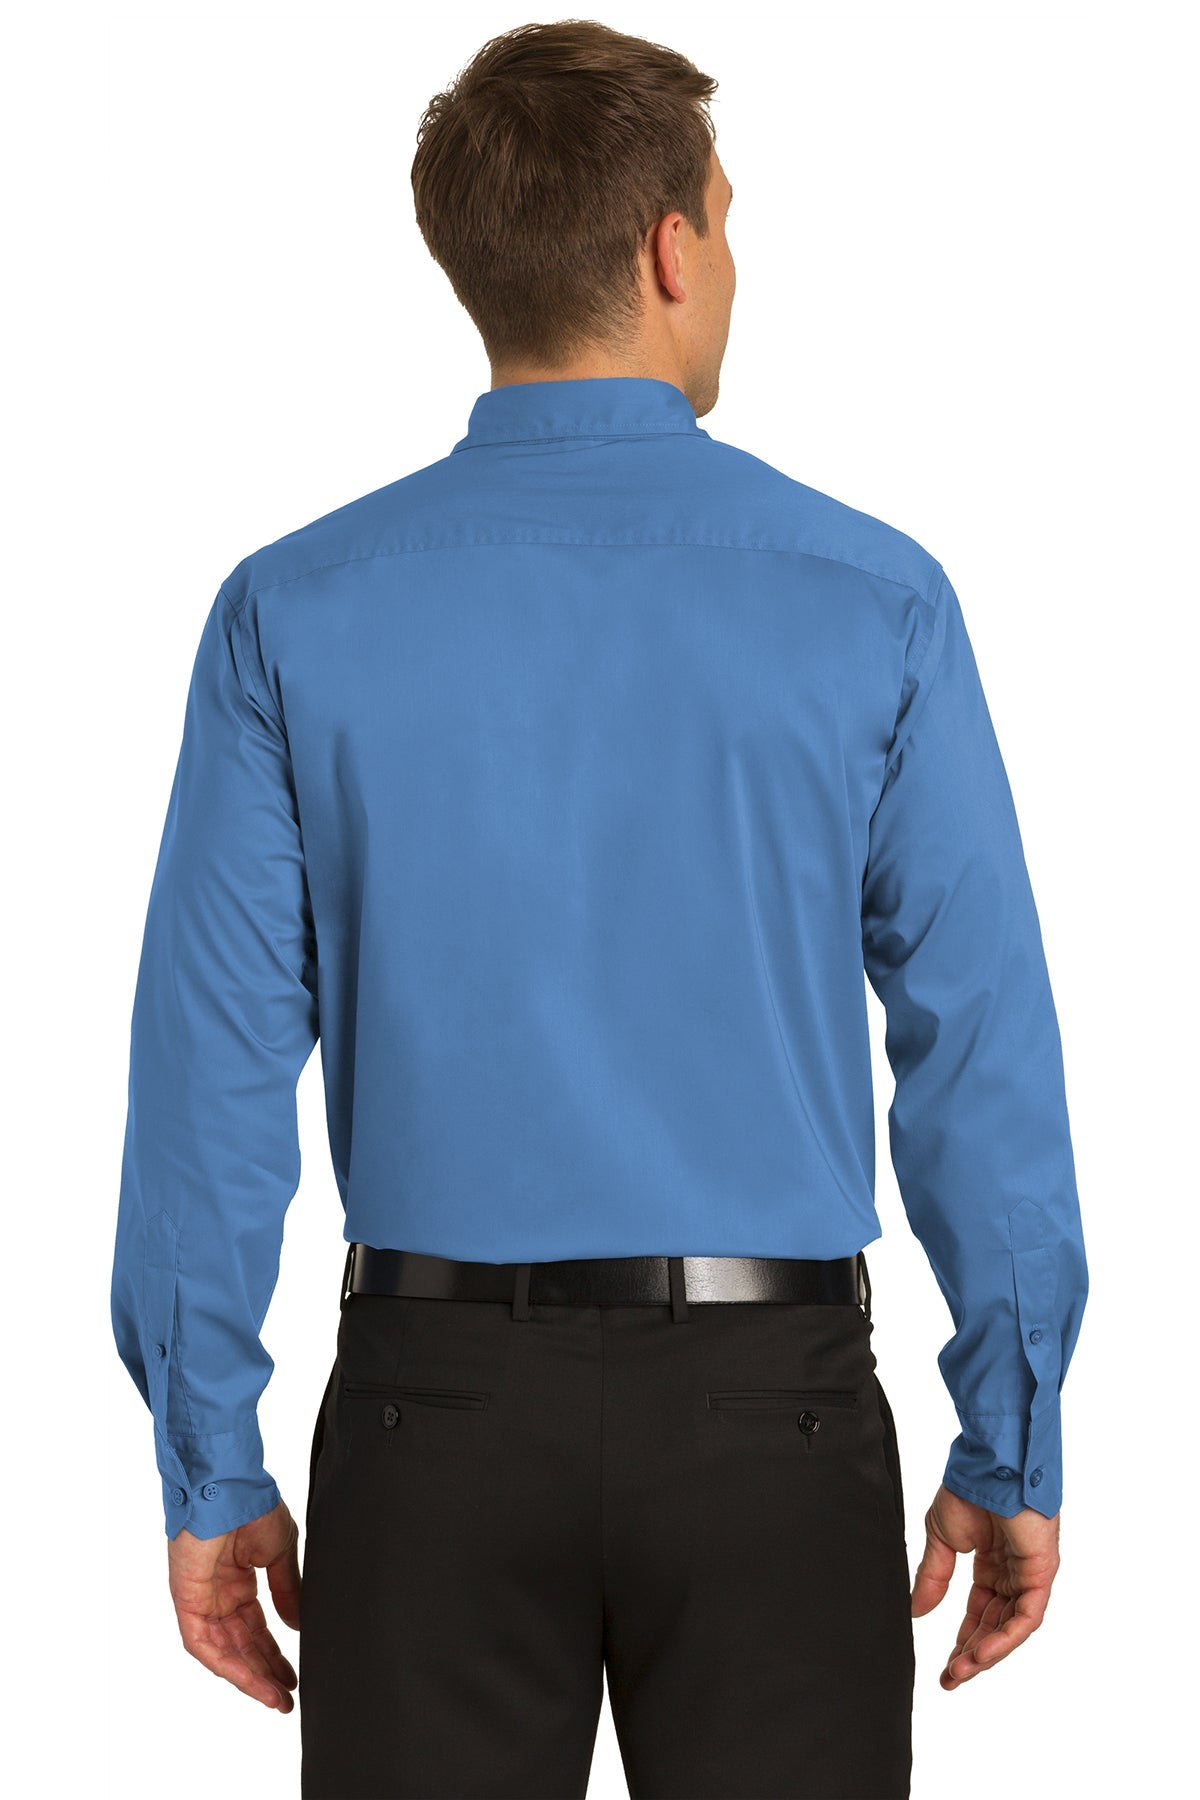 port authority_s646 _moonlight blue_company_logo_button downs